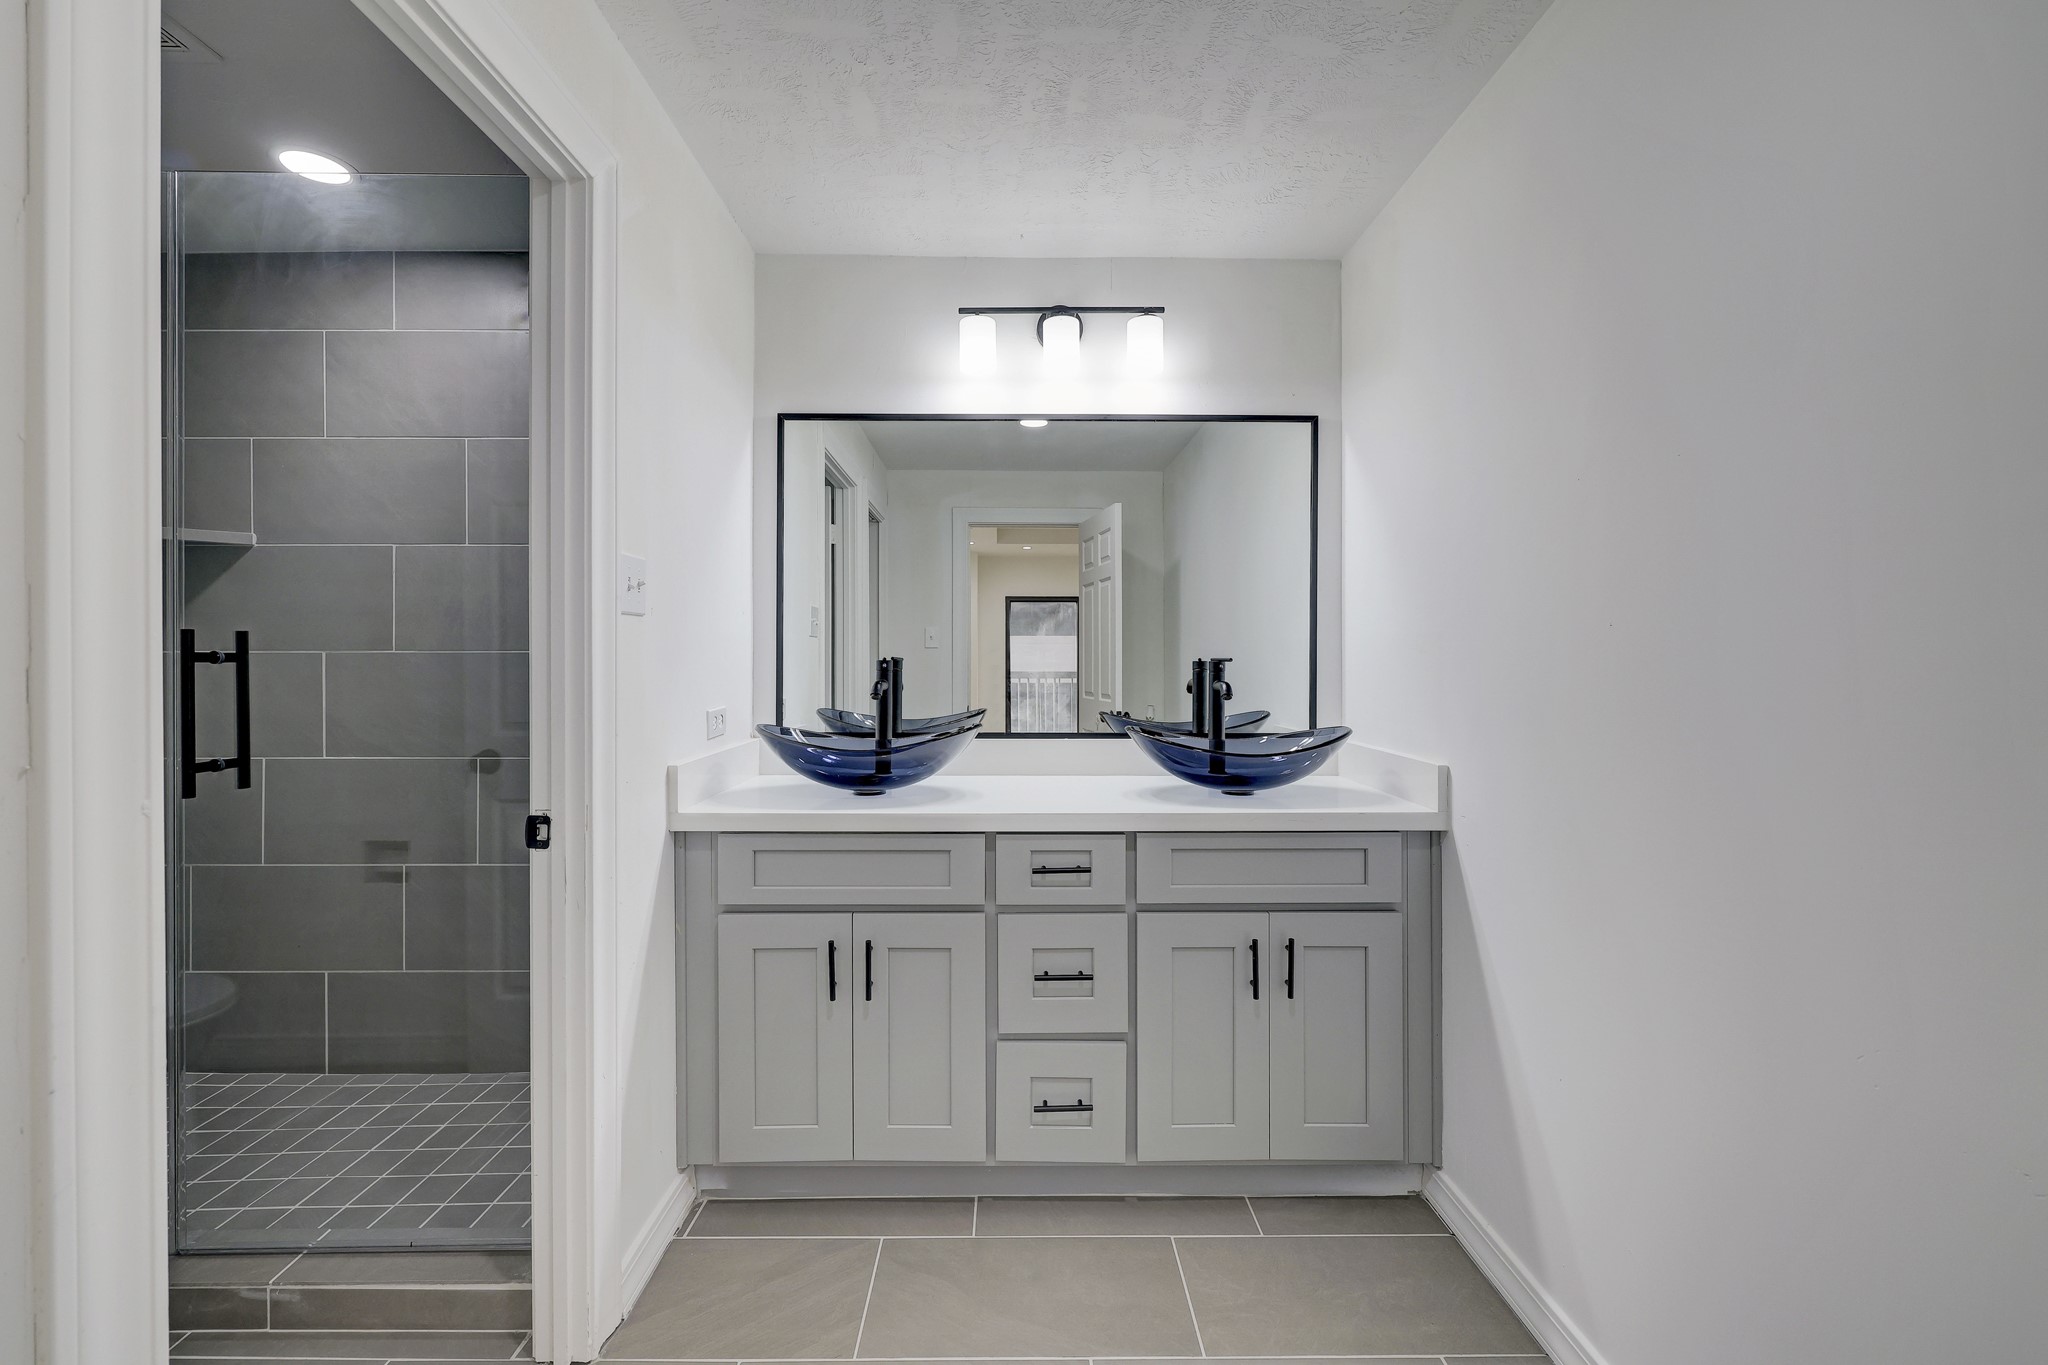 Primary bath with dual vanities and glass-enclosed shower.